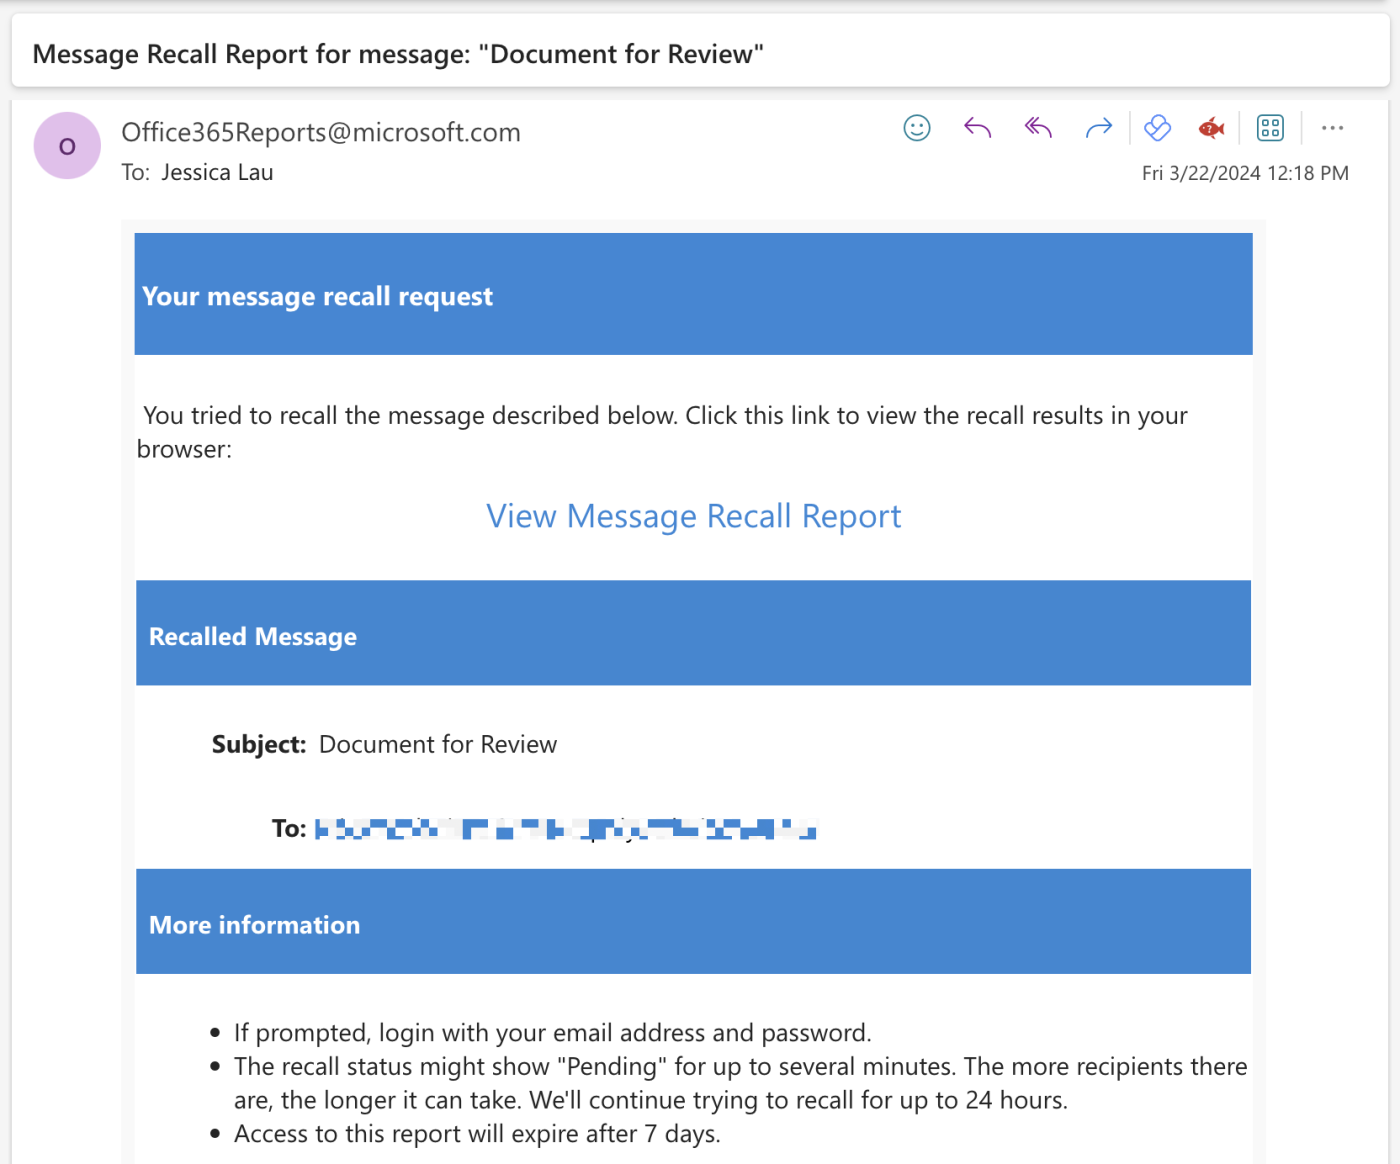 Screenshot of the message recall report in Outlook